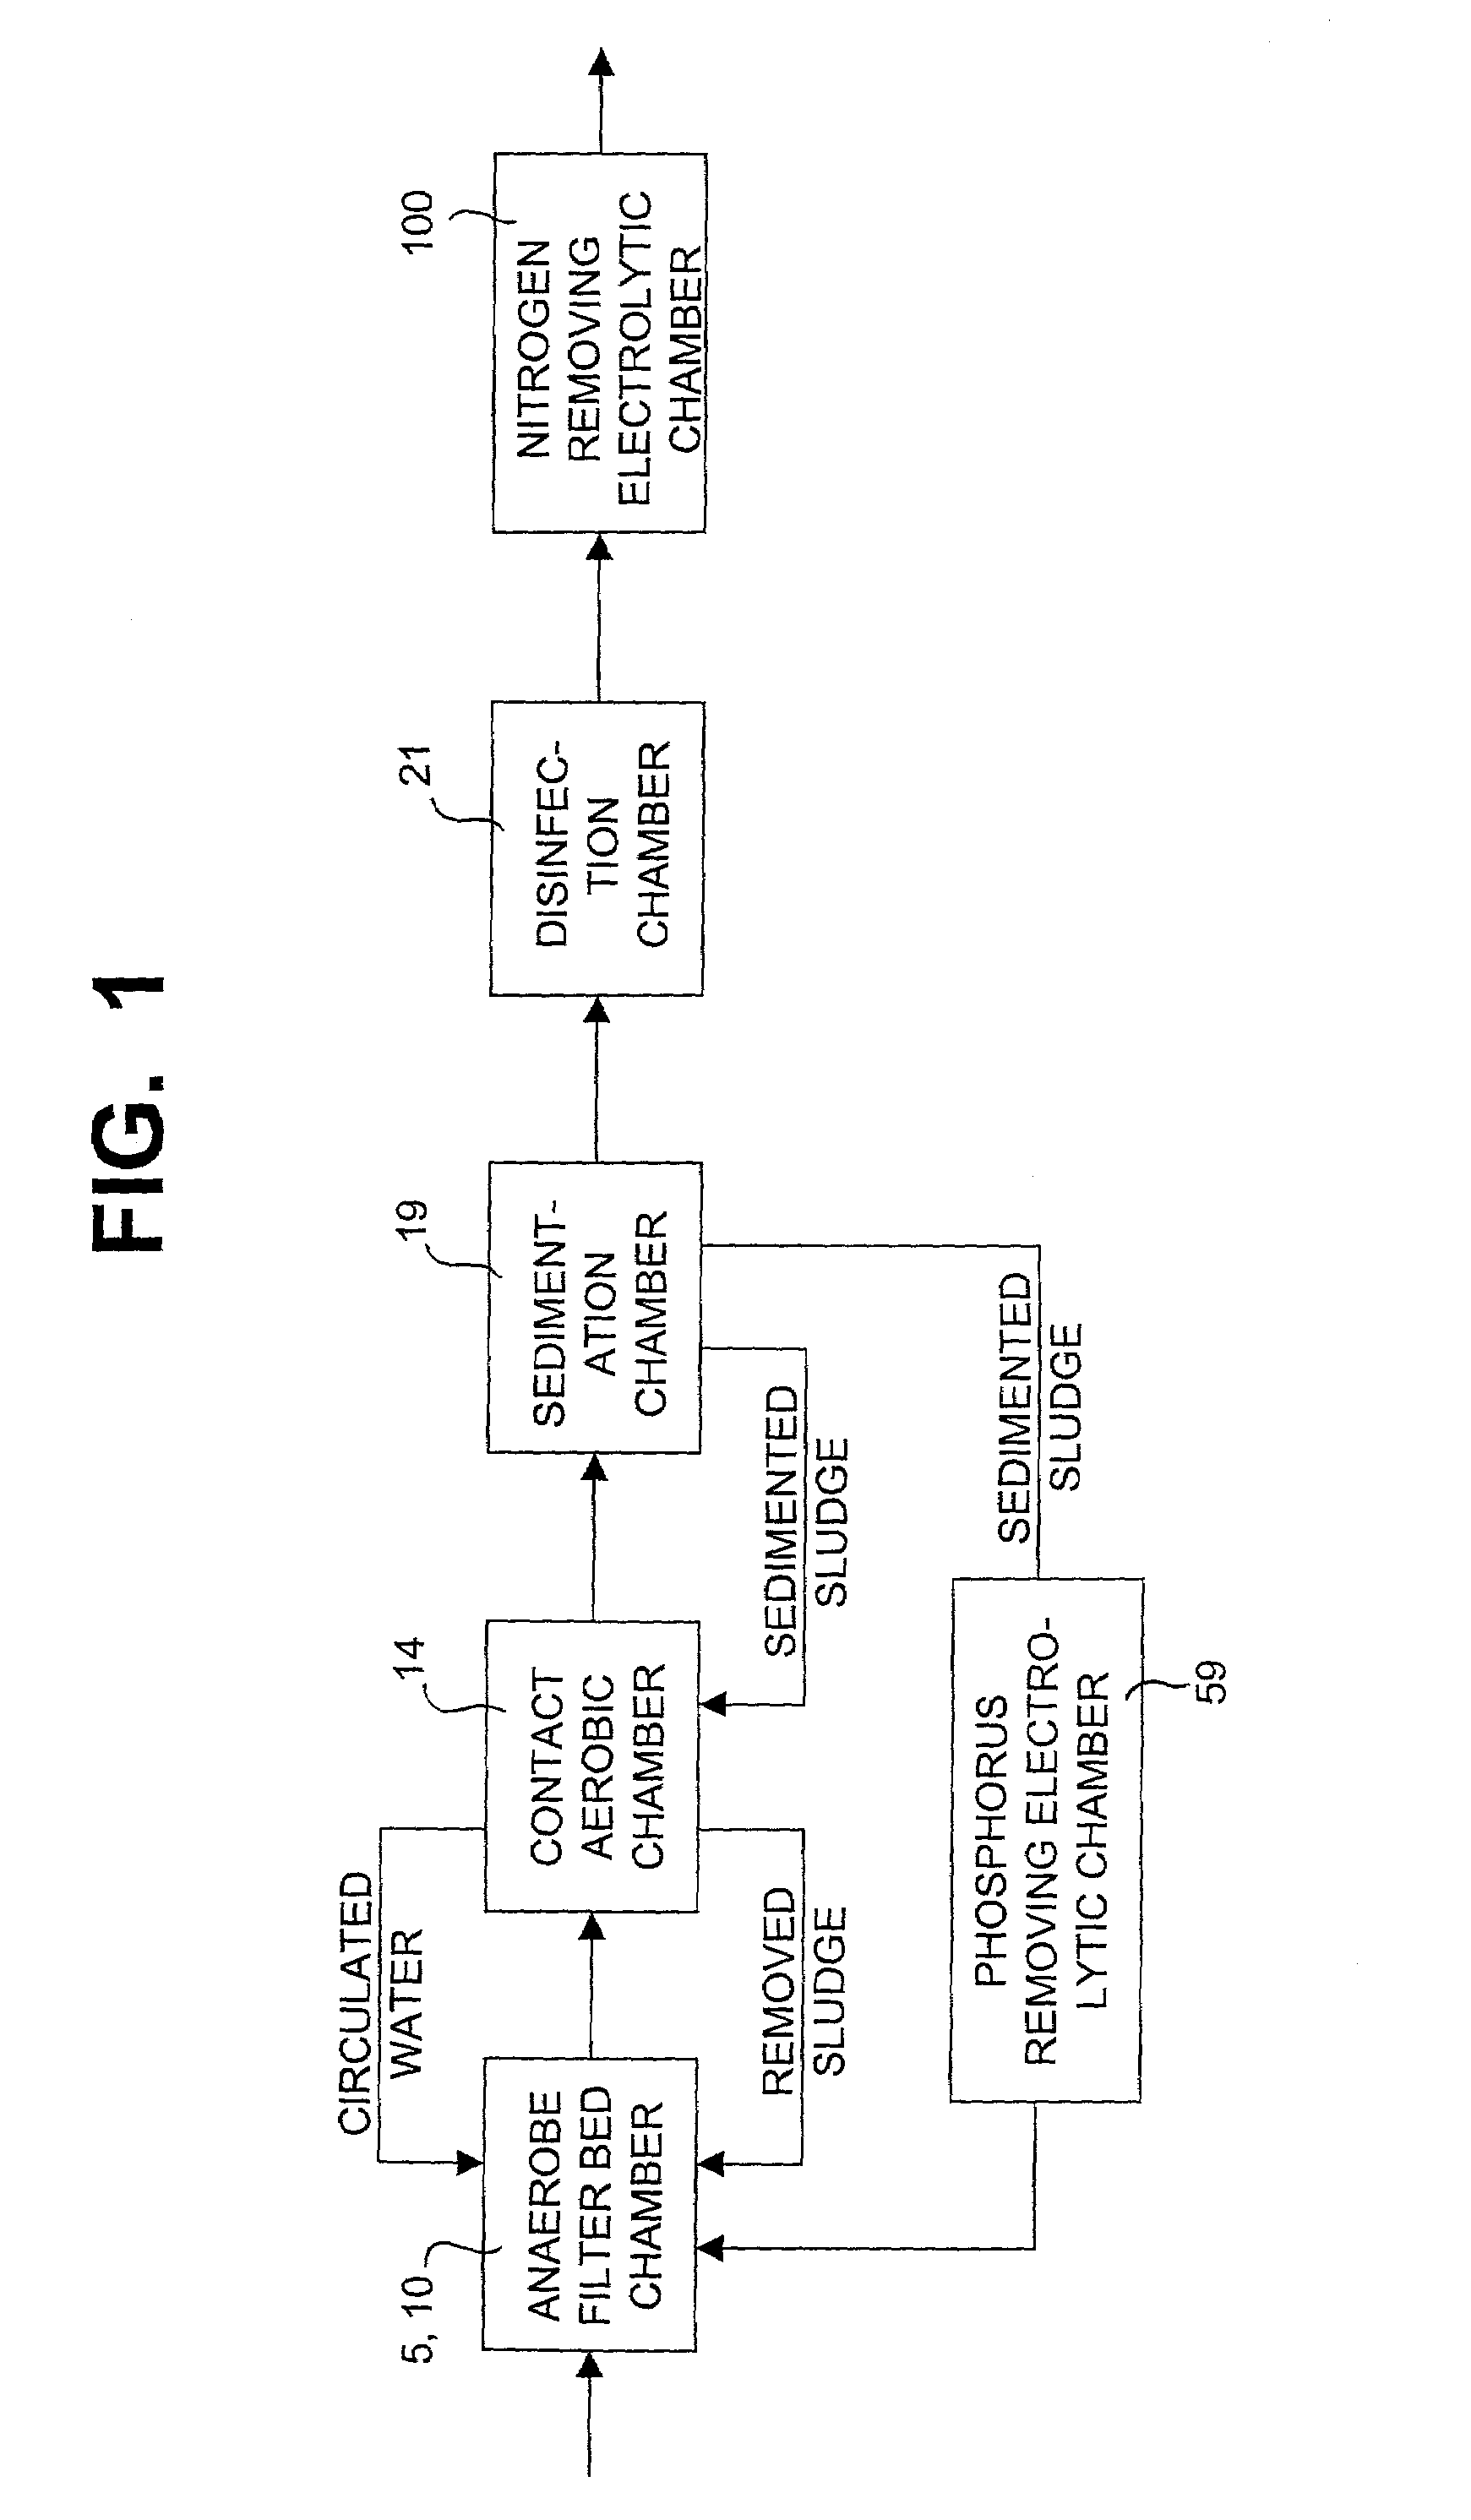 Water treatment device